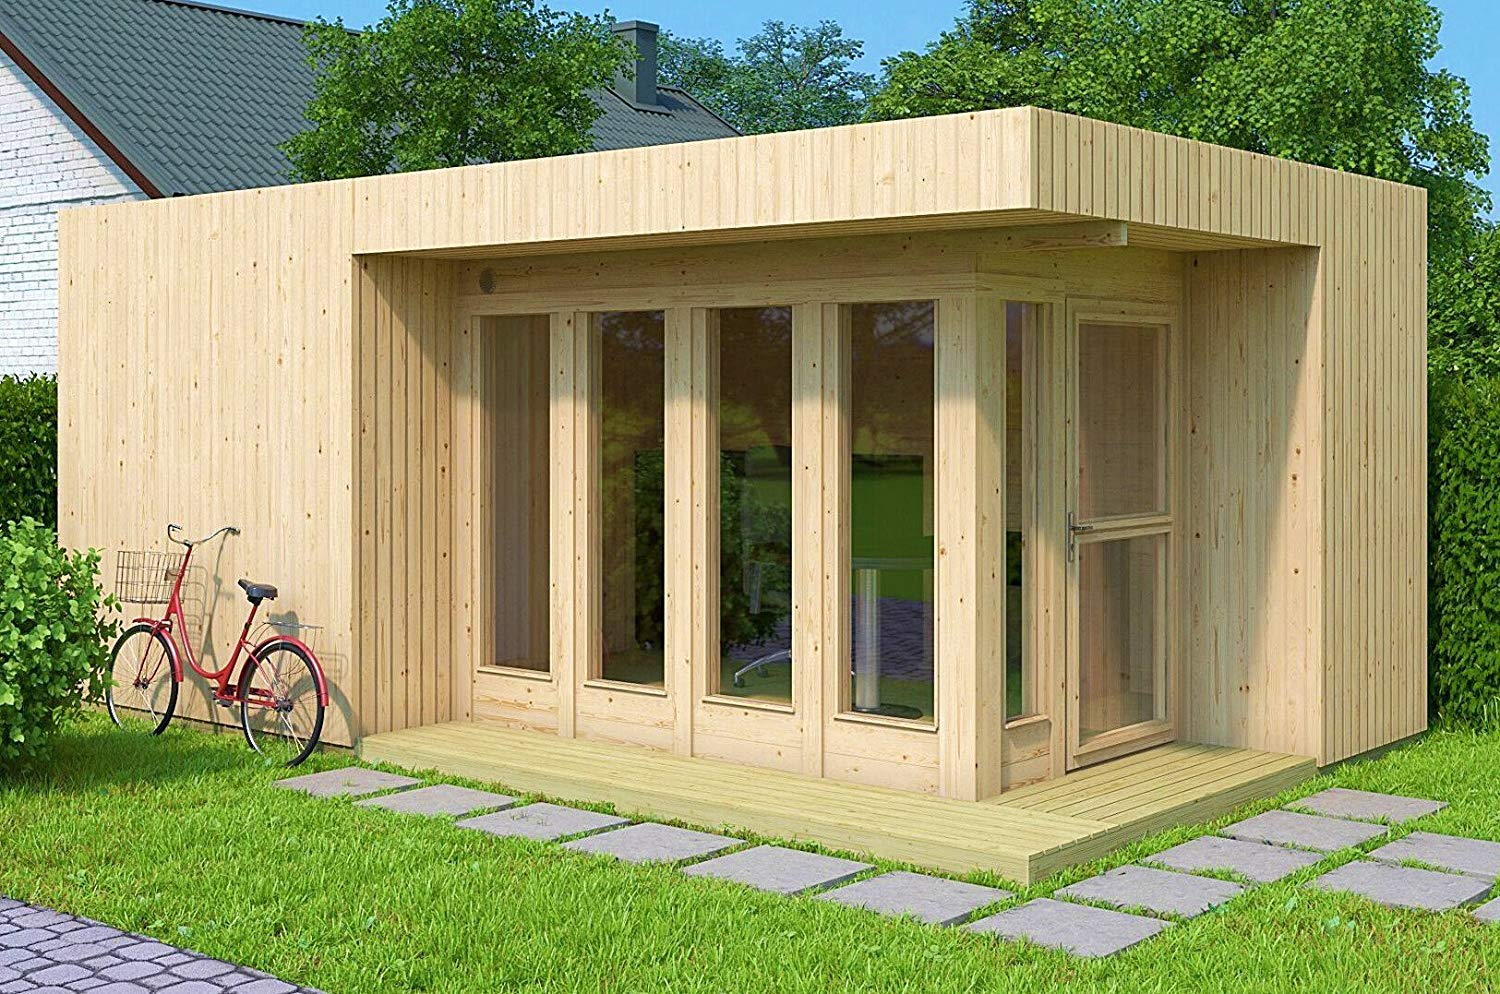 Our 7 Favorite DIY Tiny Homes on Amazon